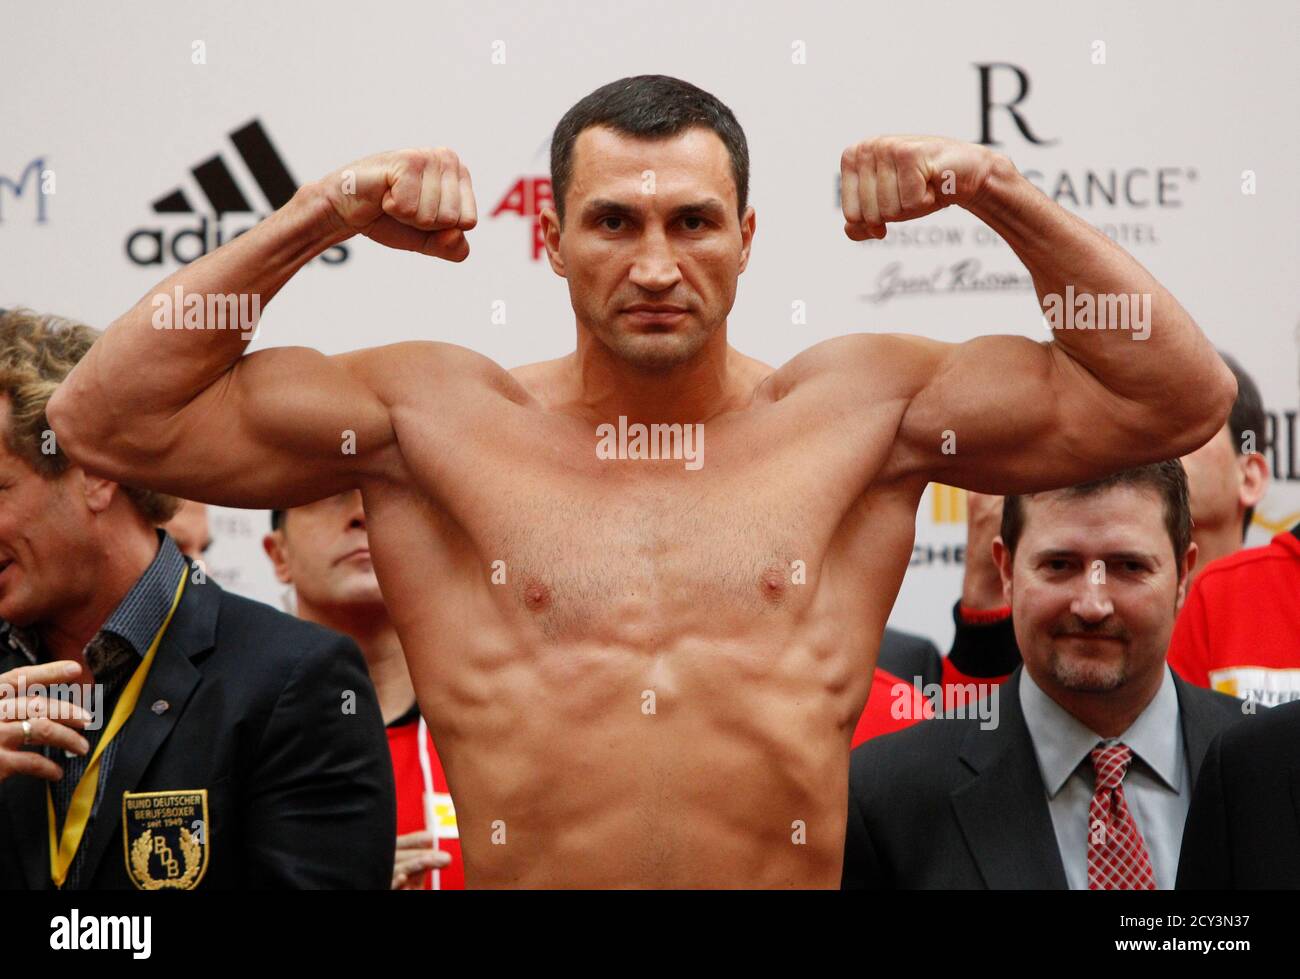 Heavyweight boxing world champion Vladimir Klitschko (C) of Ukraine attends  an official weigh-in on the eve of the title fight against challenger  Alexander Povetkin of Russia in Moscow, October 4, 2013. REUTERS/Maxim